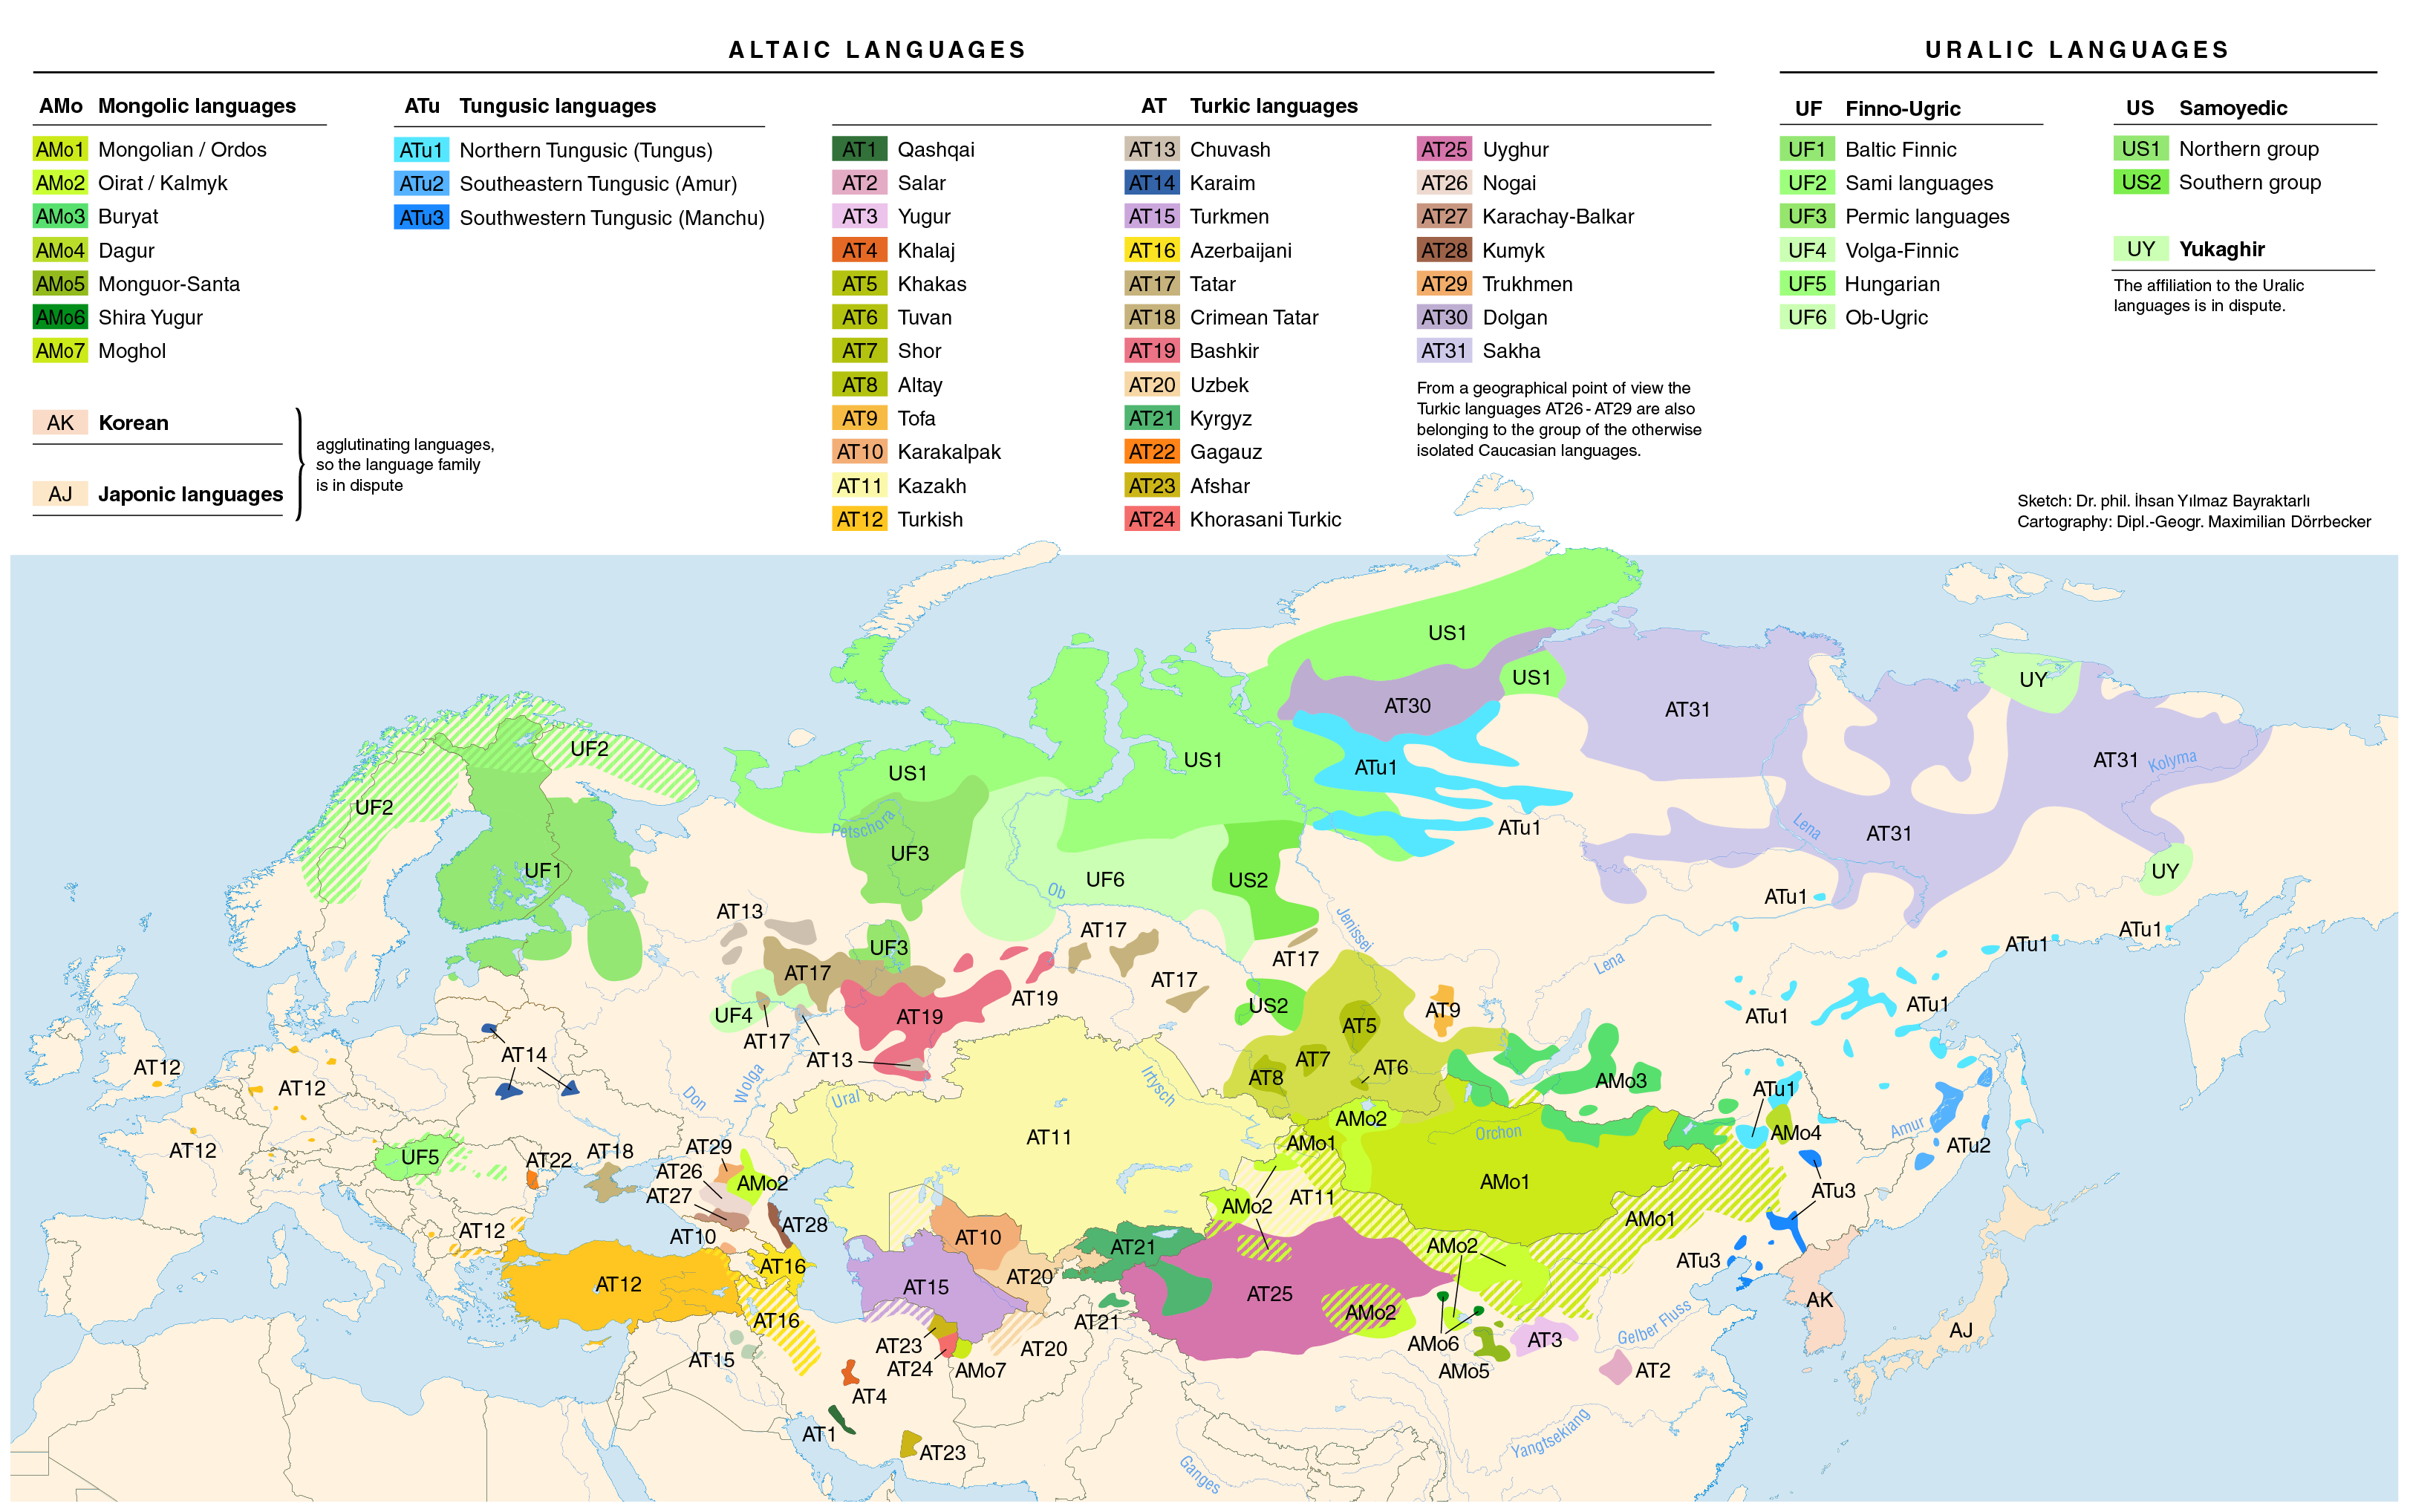 Linguistic_map_of_the_Altaic%2C_Turkic_and_Uralic_languages_(en).png